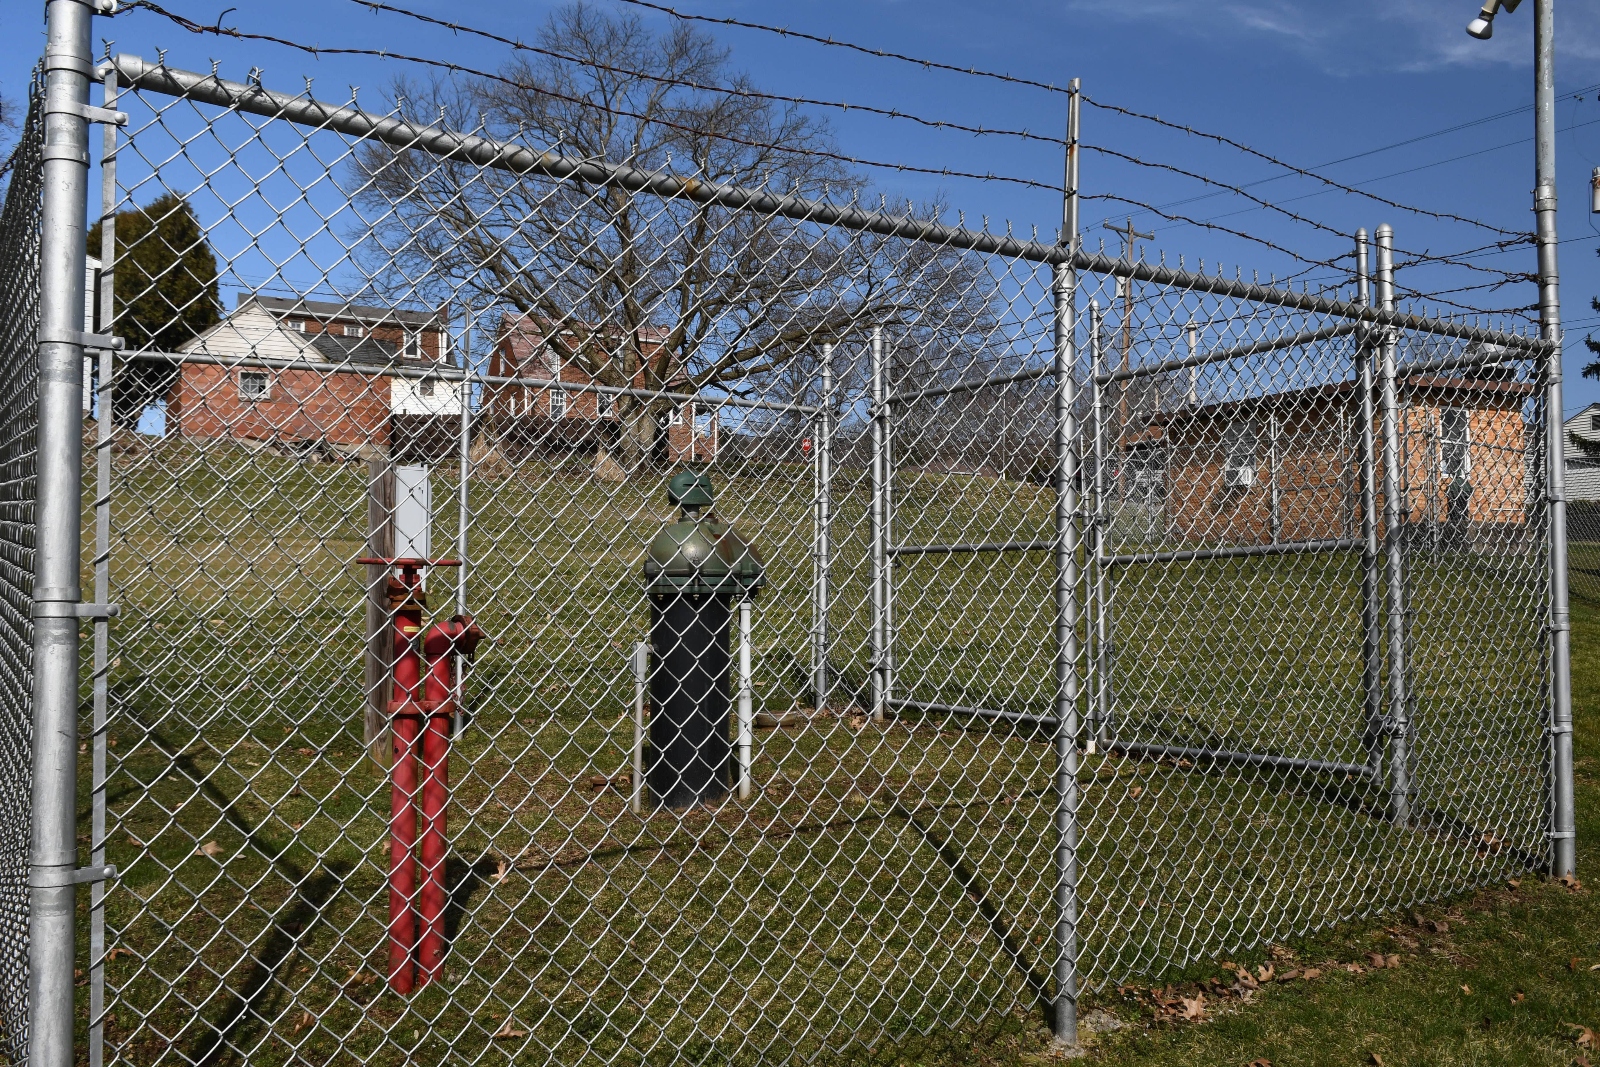 A chain-link fence surrounds a well.